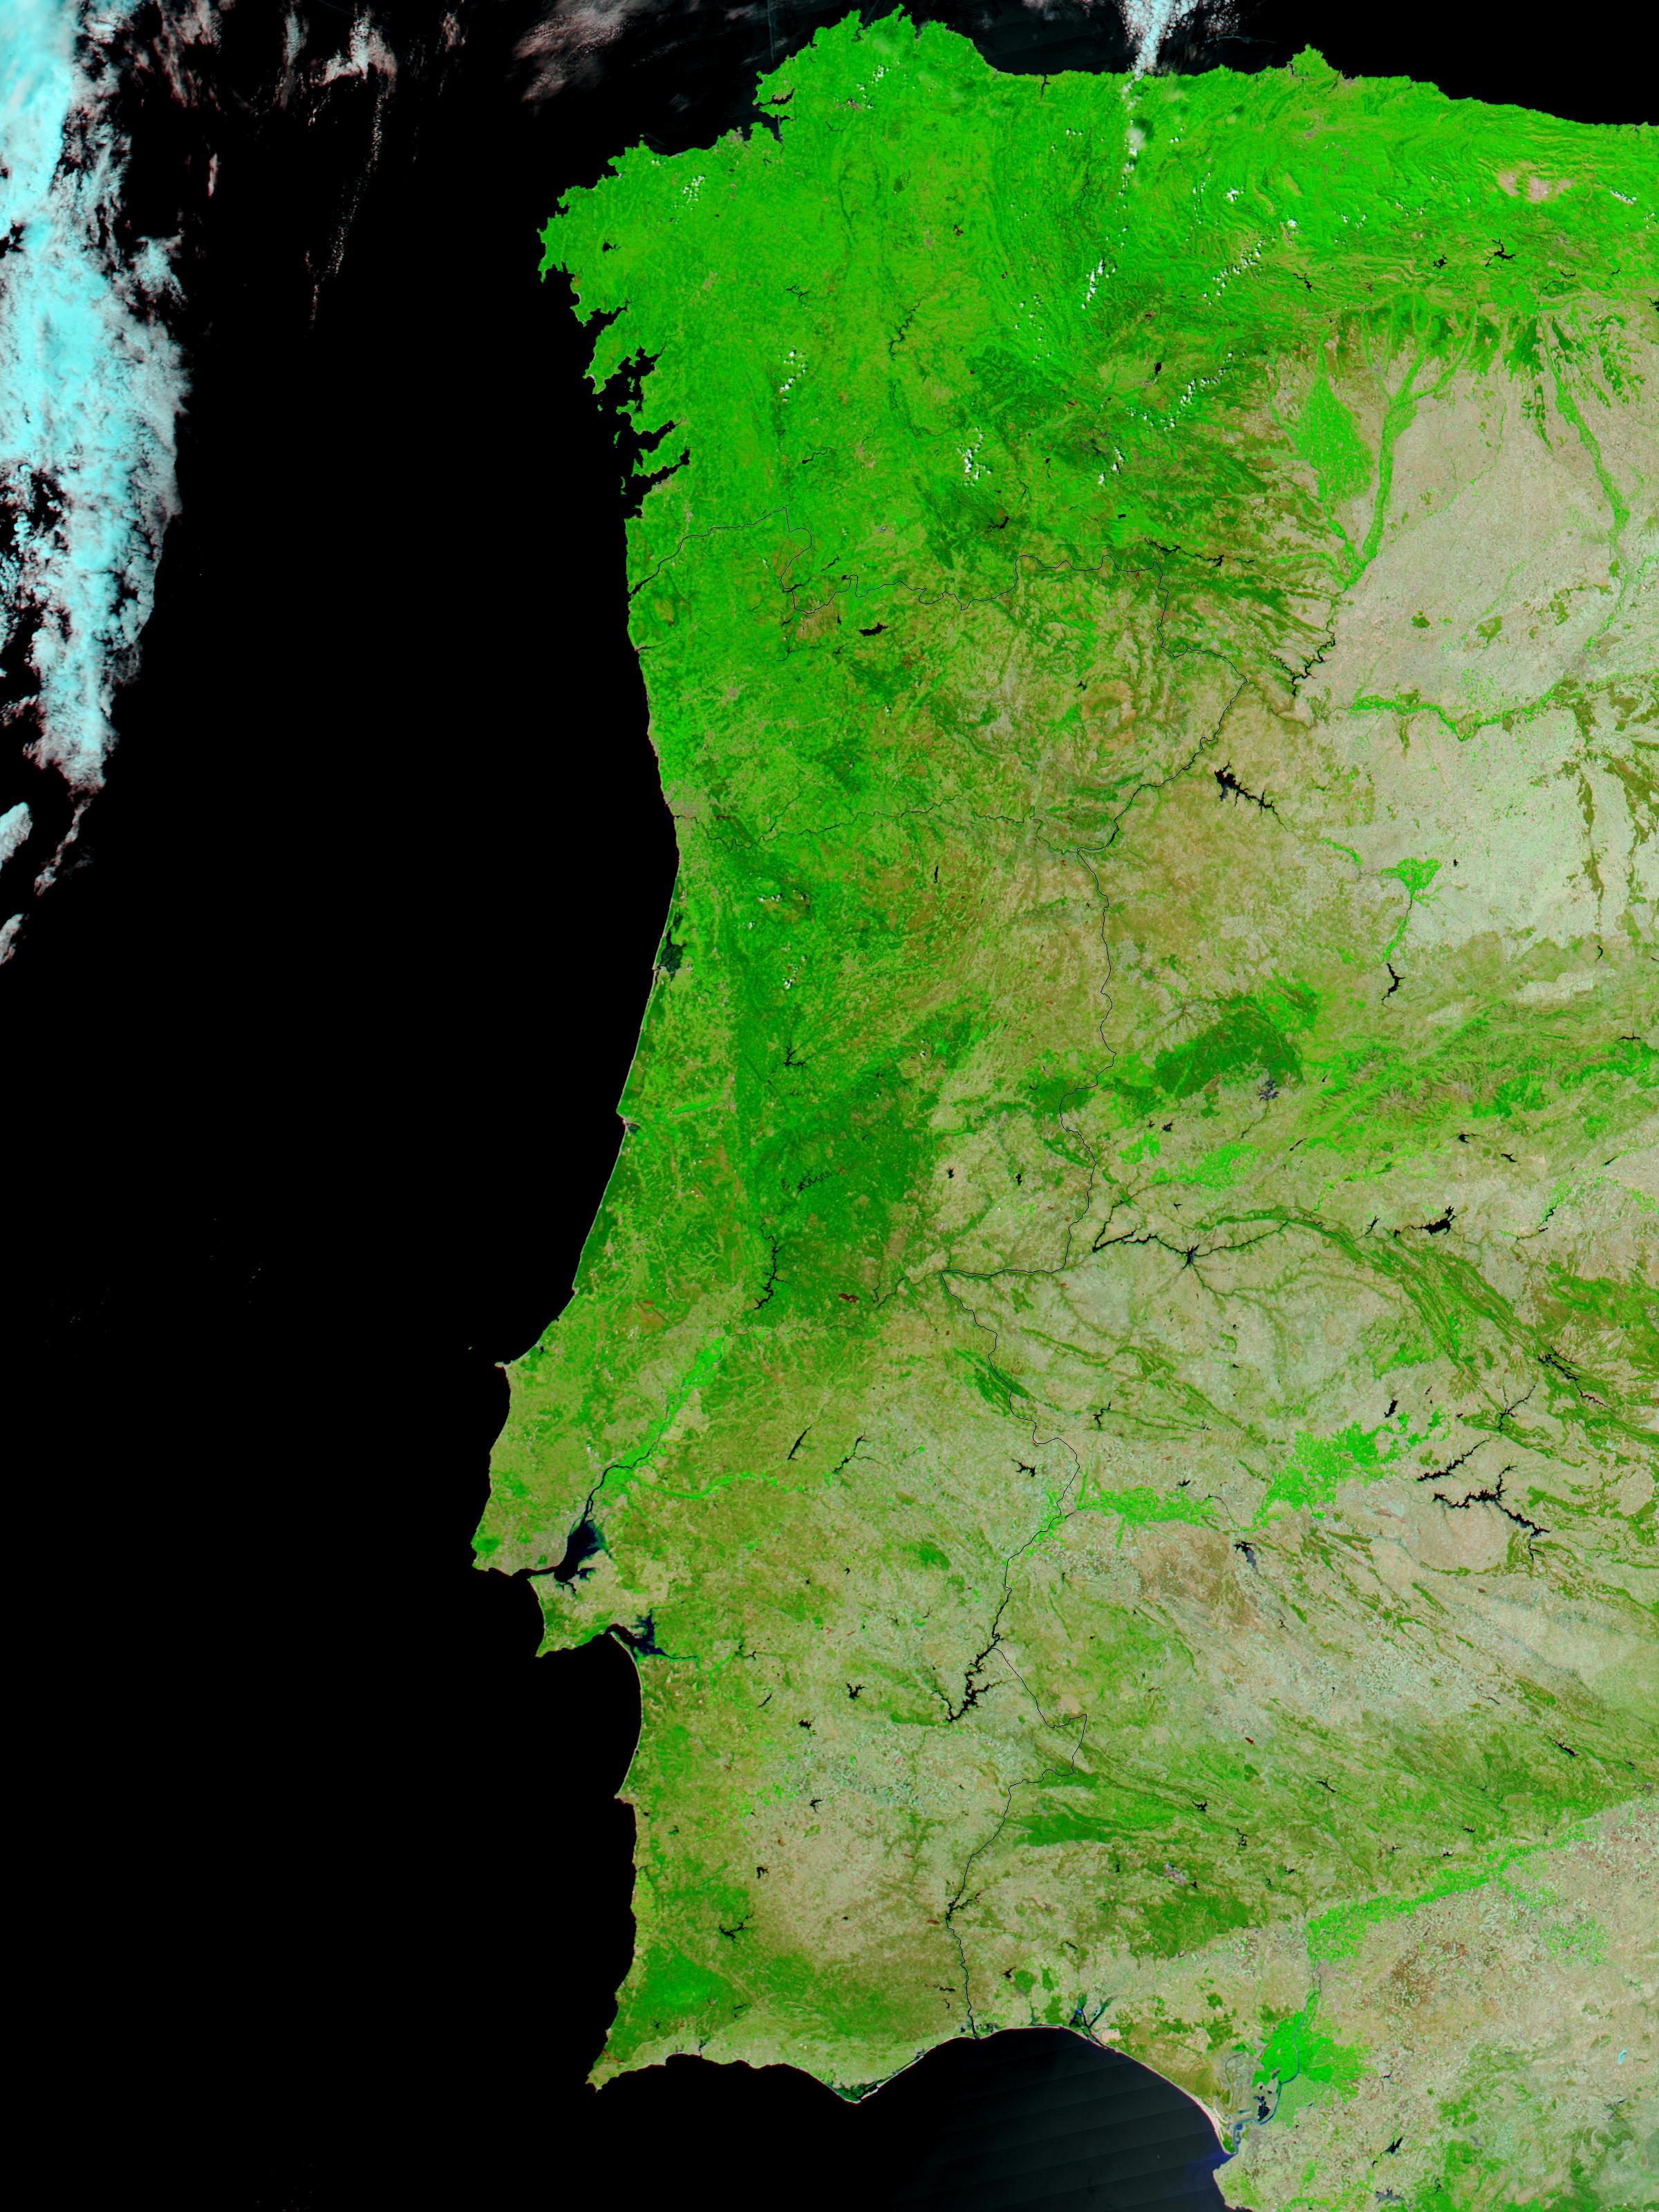 Satellite Image, Photo of Forest Fires in Portugal